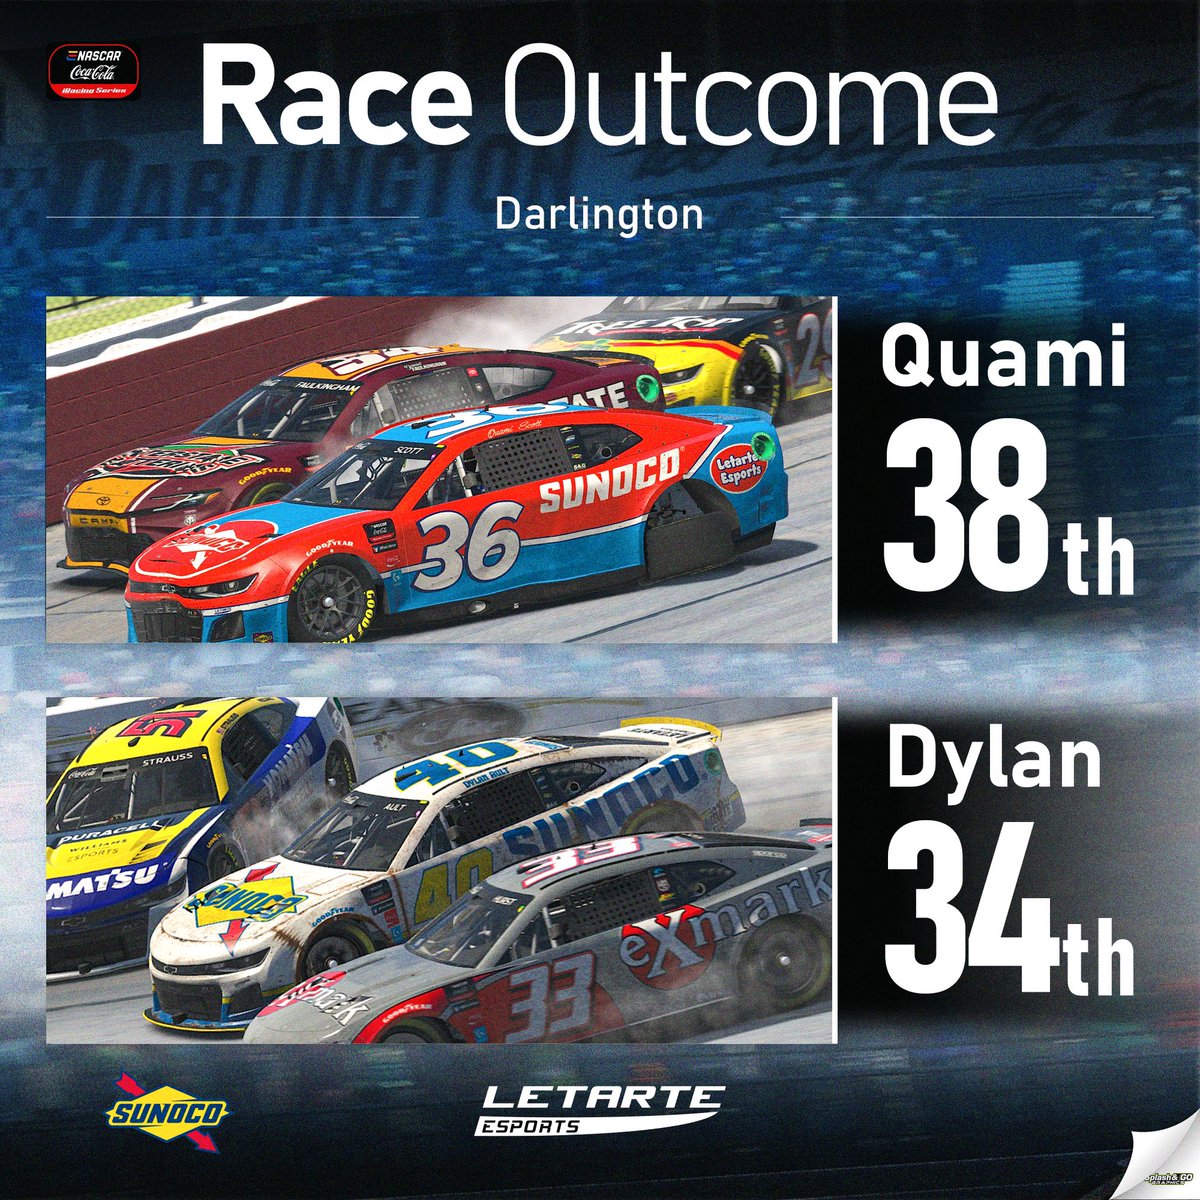 Final results from tonight’s @ENASCARGG @CocaColaRacing @iRacing Series @SunocoRacing 120 at @TooToughToTame:

@dylanault42: P 3️⃣4️⃣
@YungQuami: P 3️⃣8️⃣

#eCCiS / #eNASCAR / #FuelingVictories